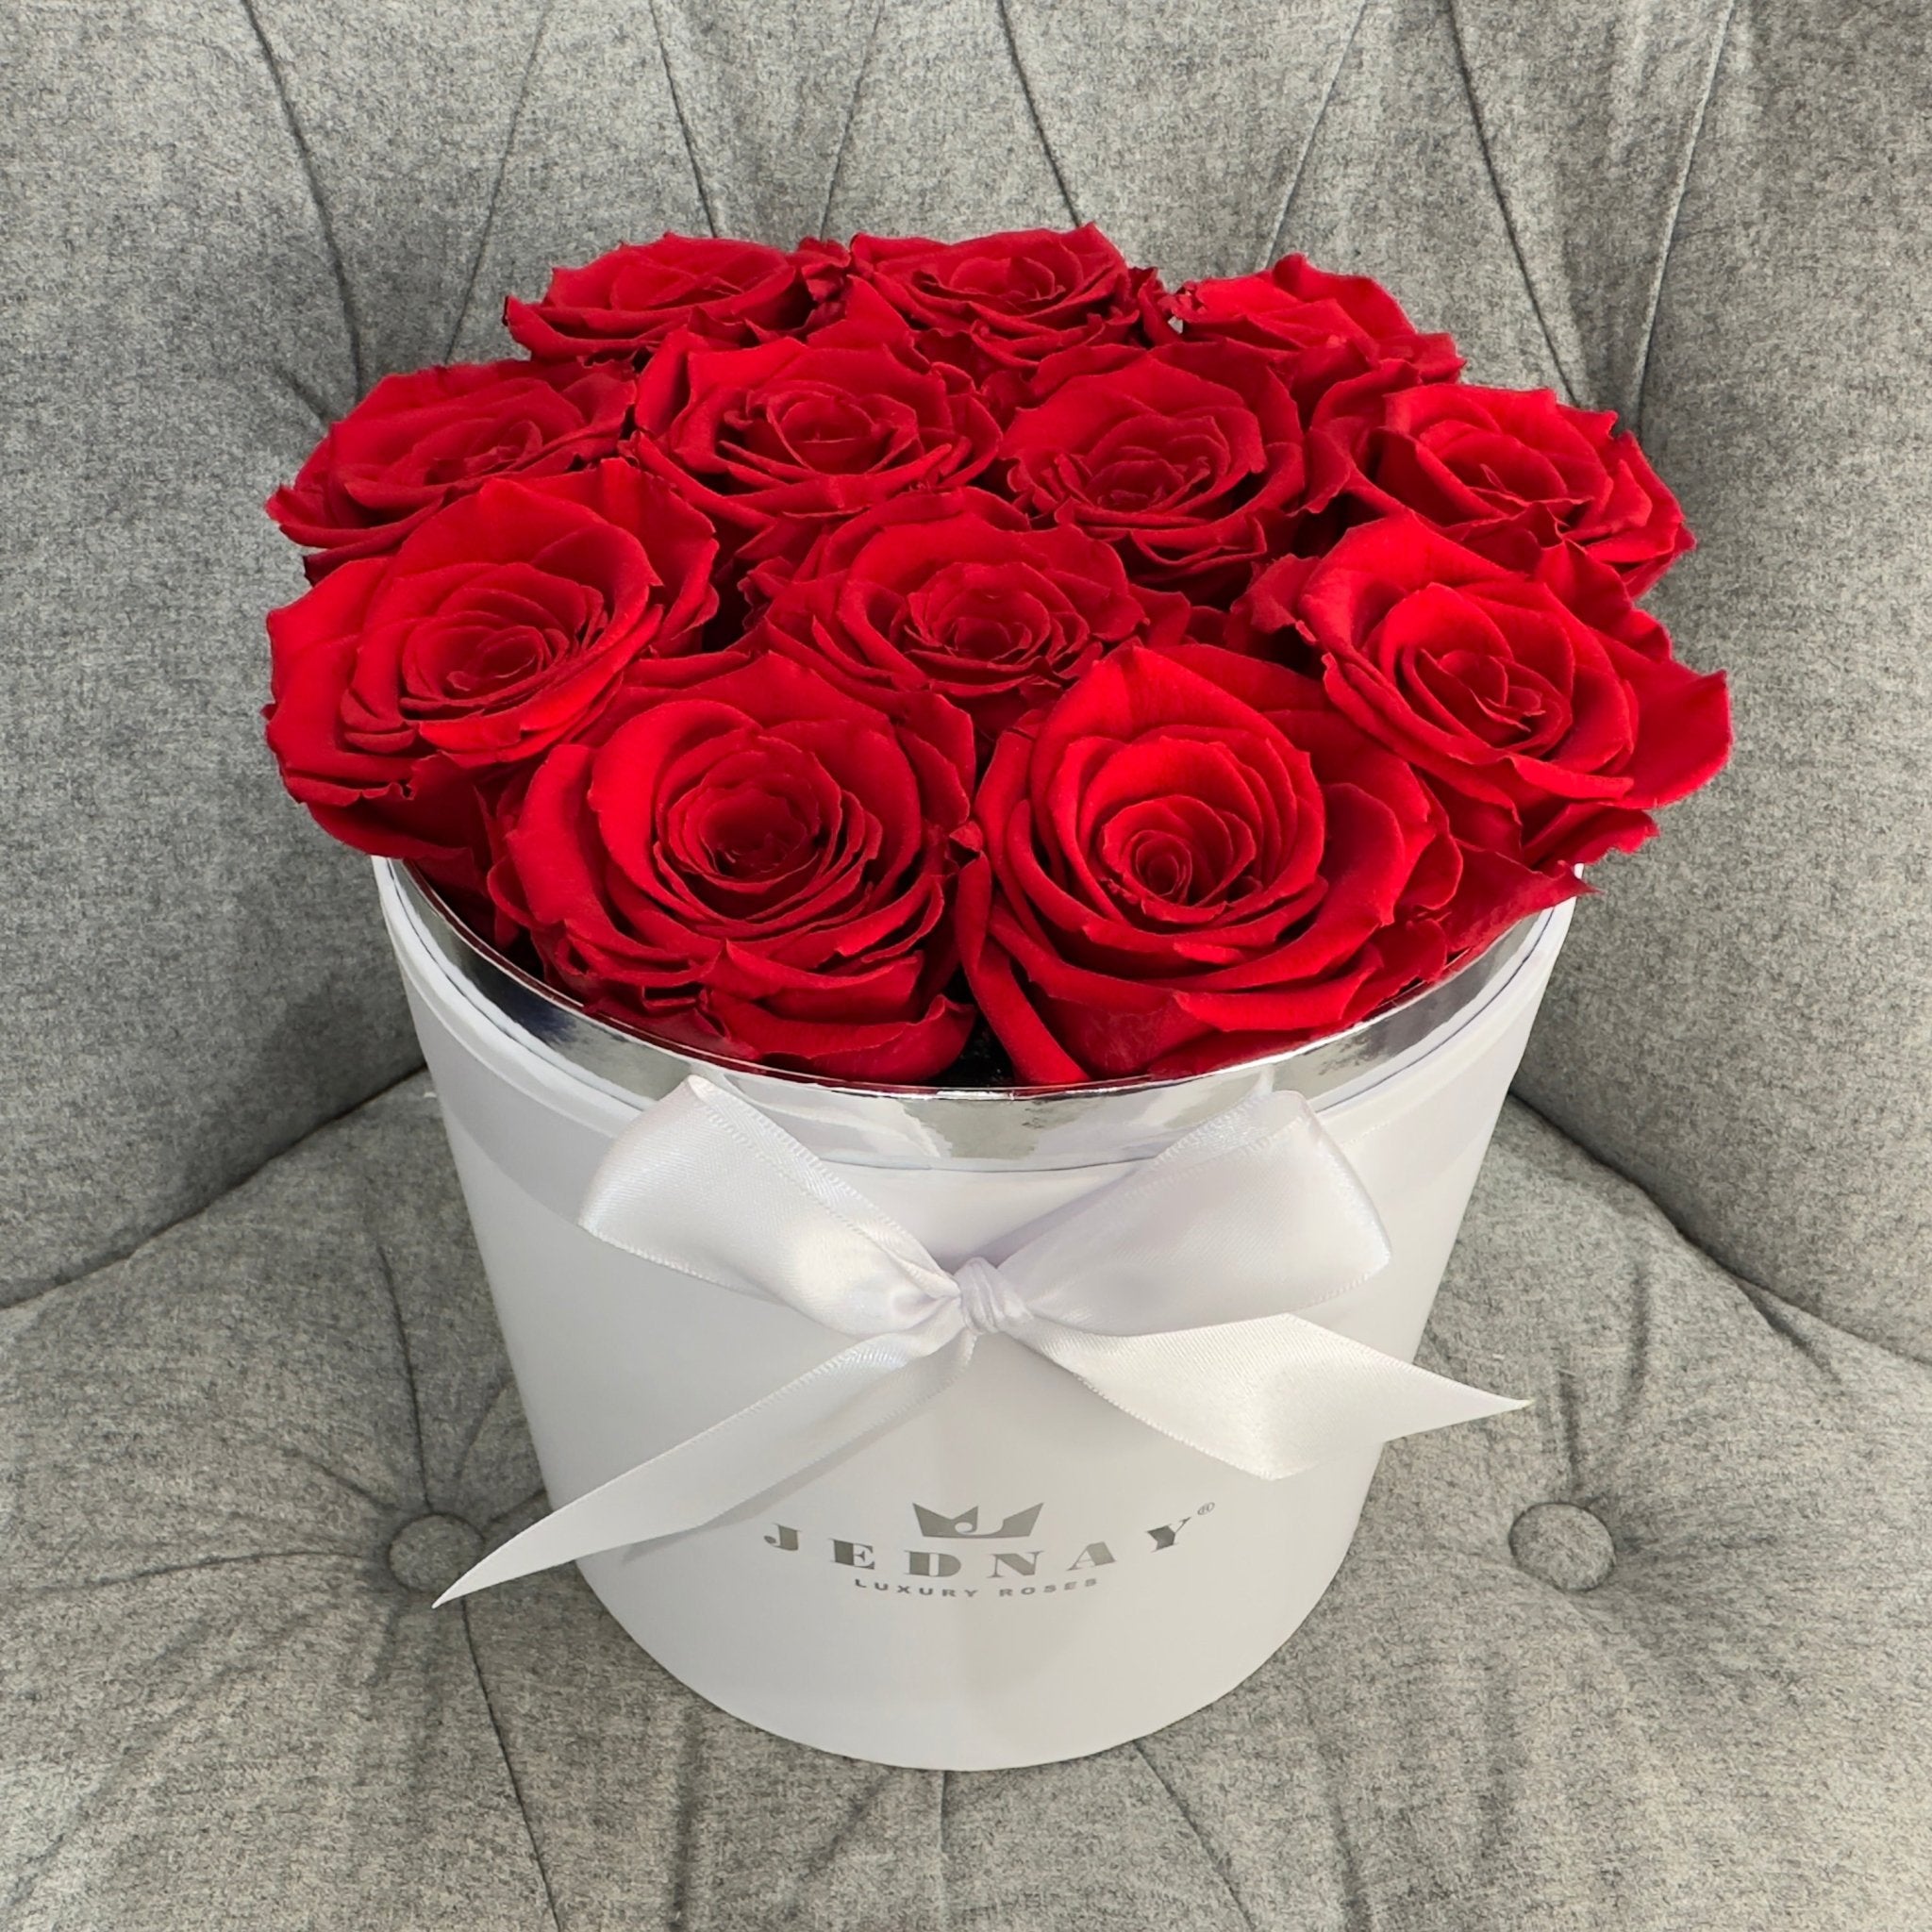 The Dozen - Classic Red Eternal Roses - White Box - Jednay Roses